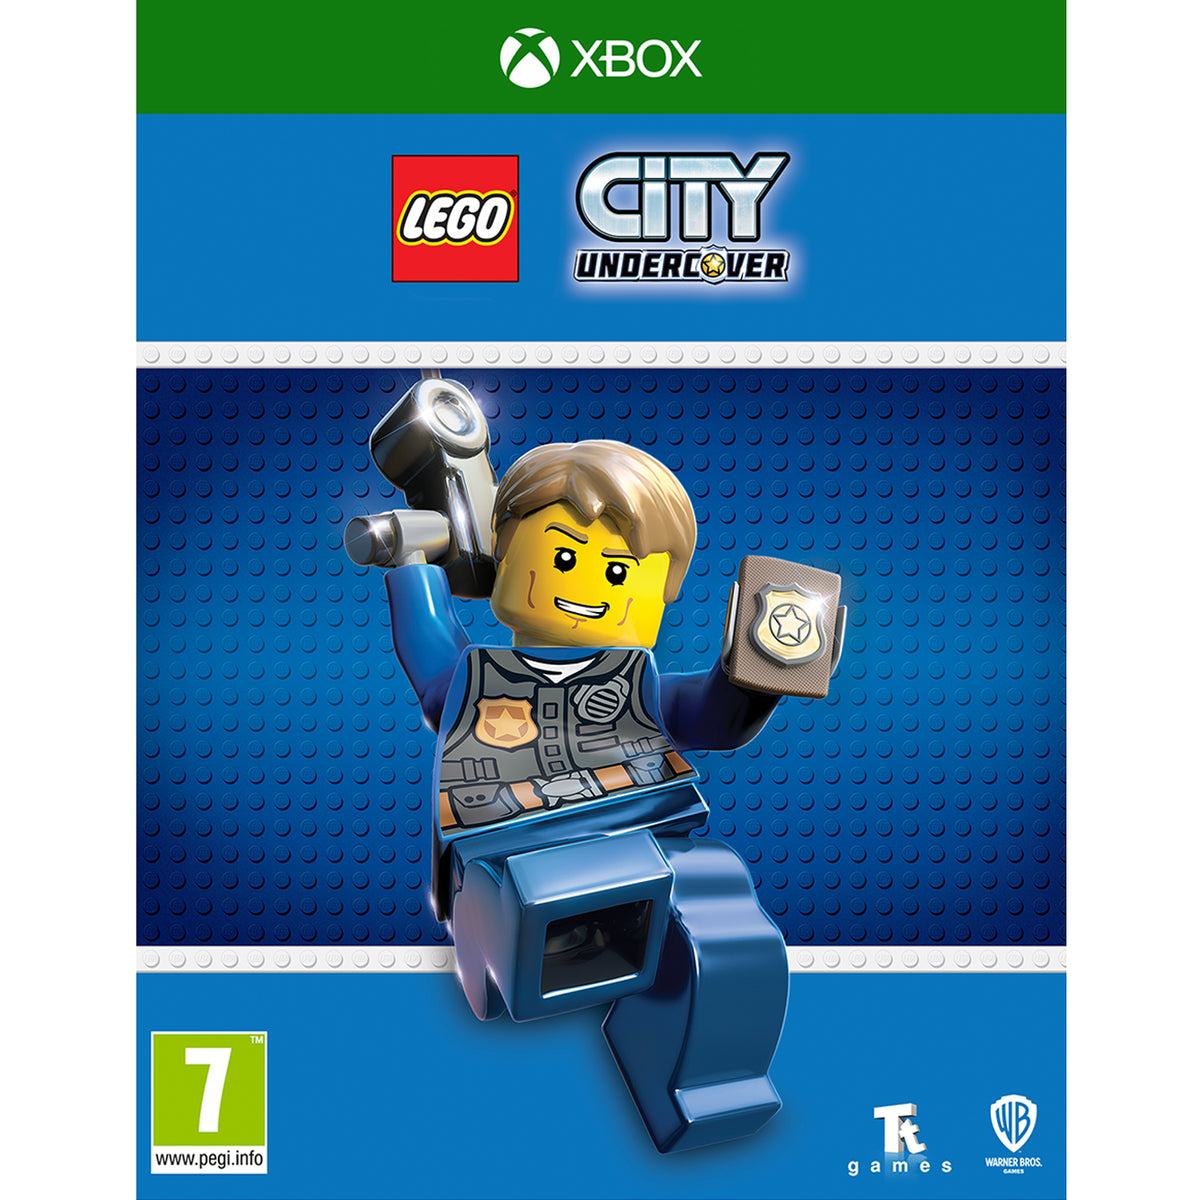 LEGO City Undercover - One – Entertainment Go's Of The Day!